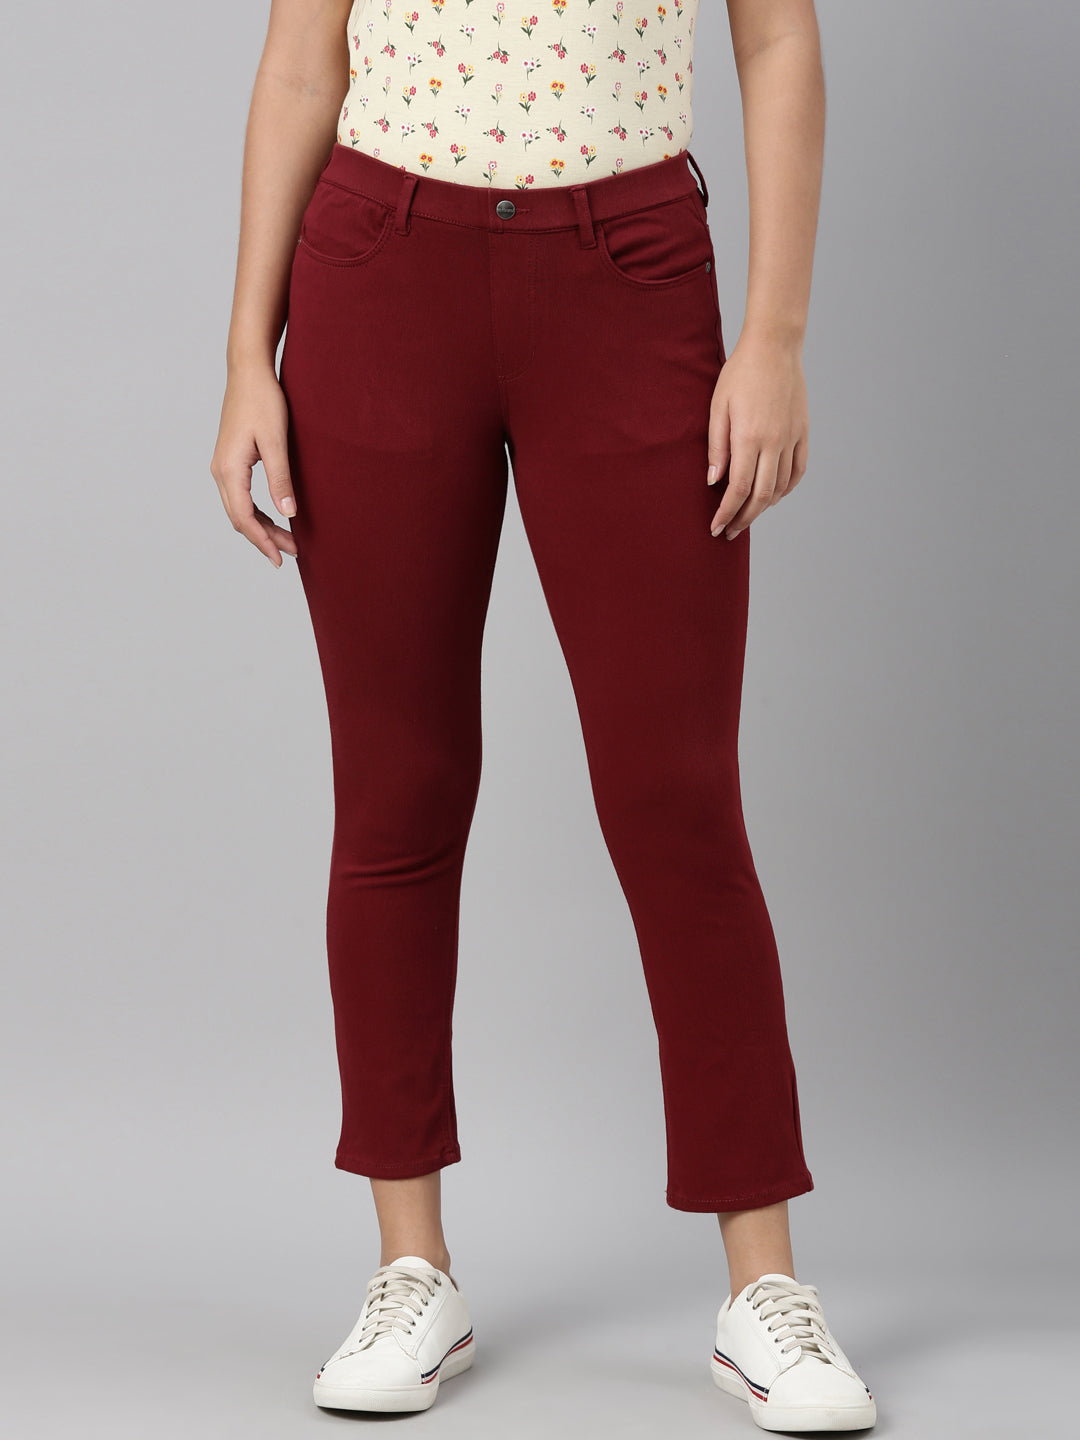 Buy Maroon Jeans & Jeggings for Girls by Go Colors Online